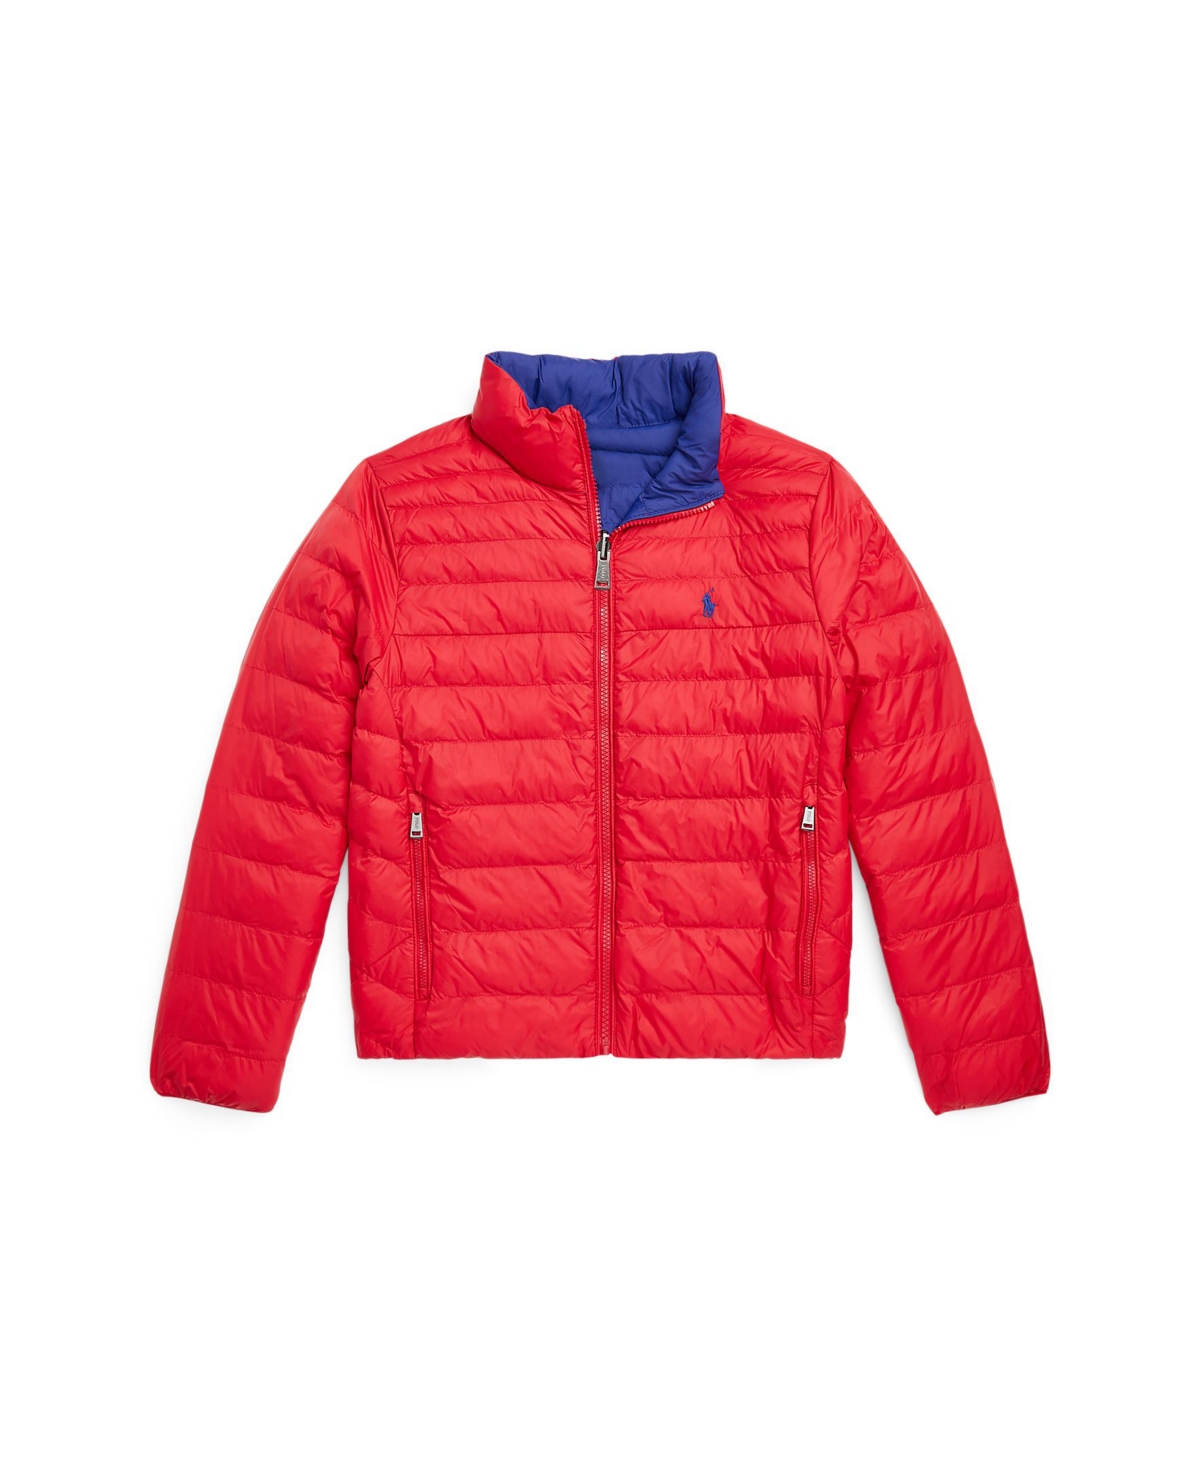 Polo Ralph Lauren Kids' Toddler And Little Unisex P- Layer 2 Reversible Jacket In Red,heritage Royal